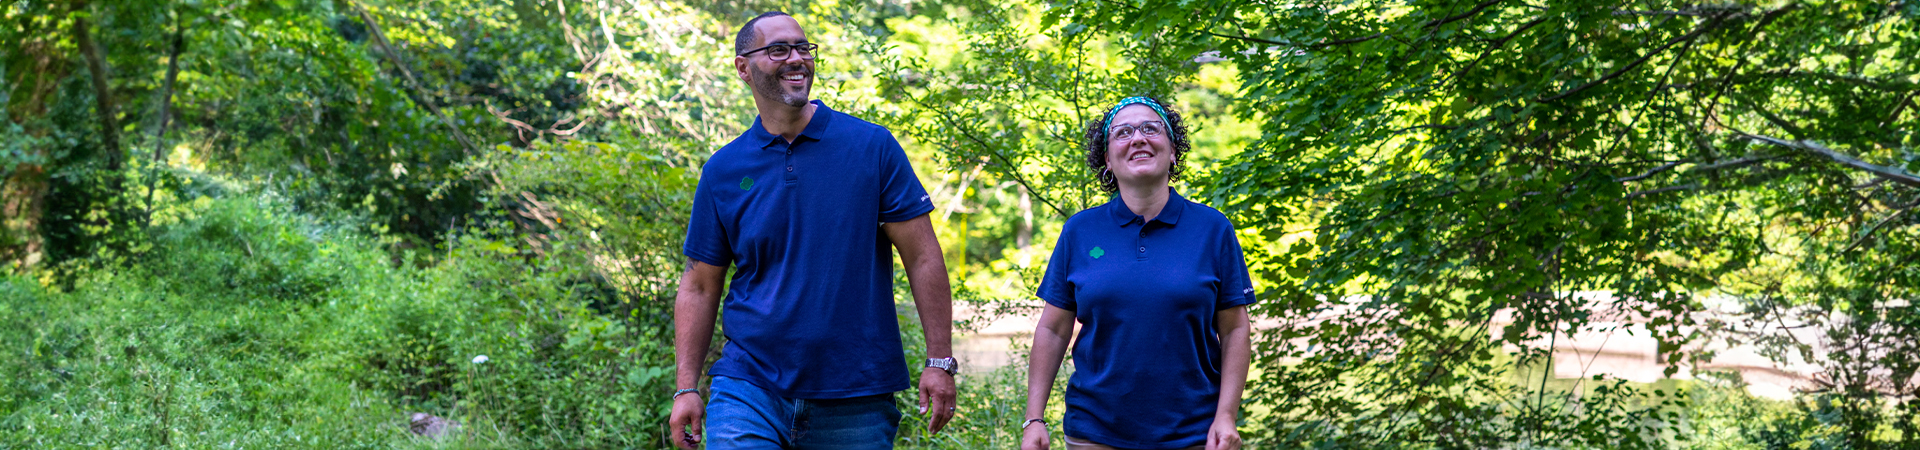  a man and a woman adult volunteer in blue shirts walking through nature 